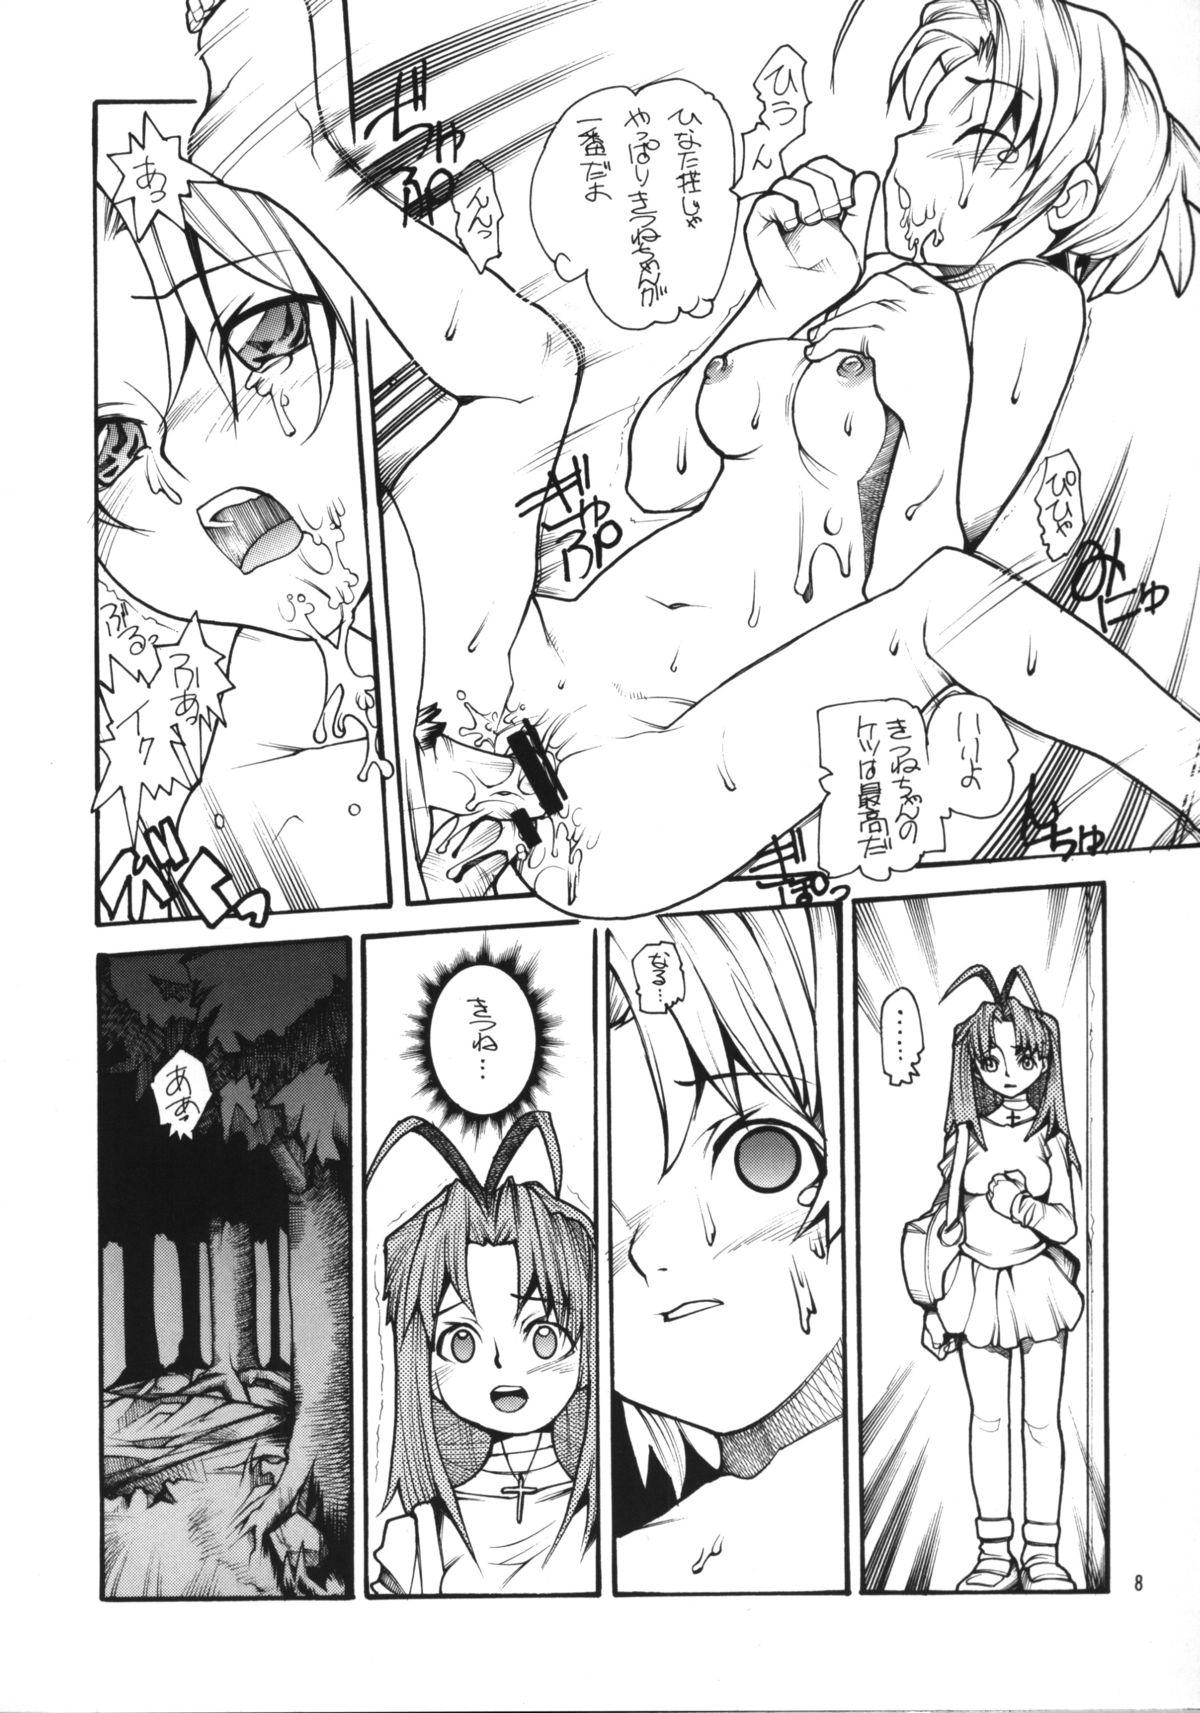 Whore HR6 | Hyper Restaurant 6 - Love hina Exposed - Page 7